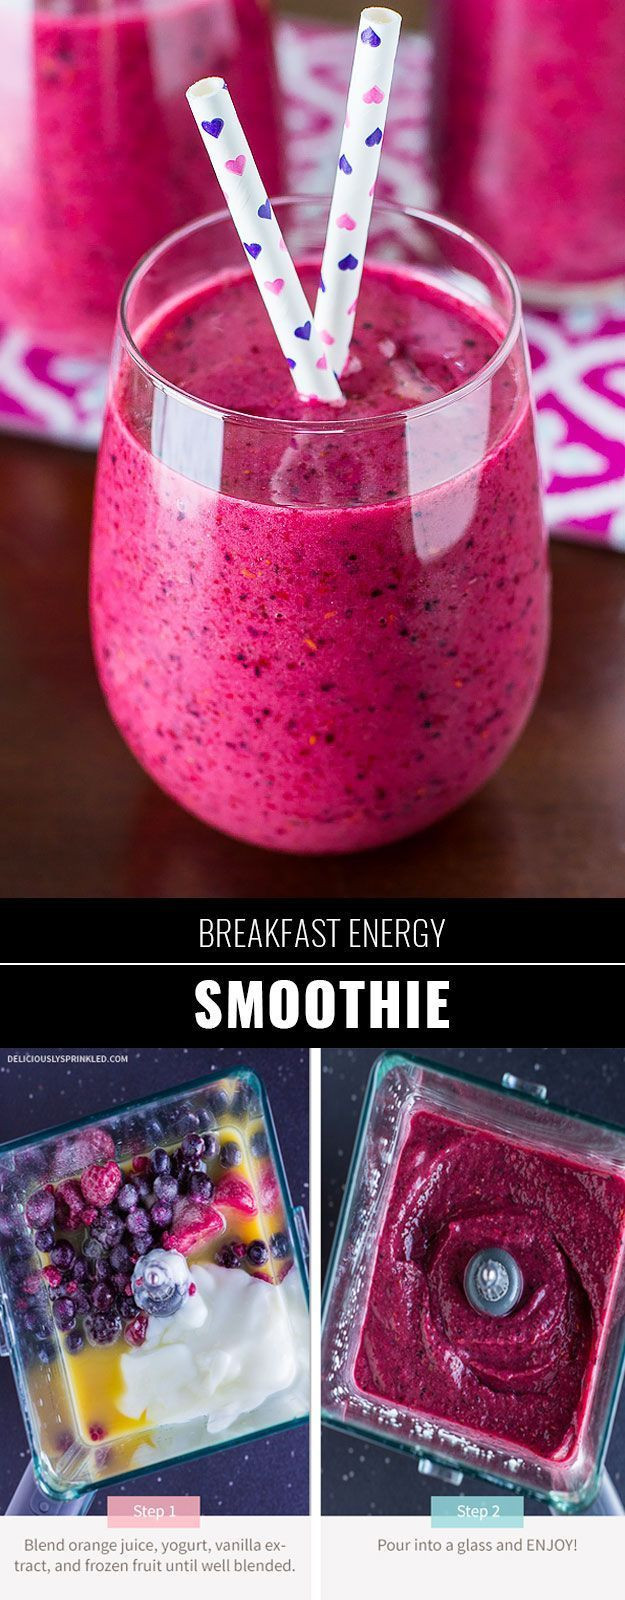 Smoothie Recipes For Weight Loss And Energy
 31 Healthy Smoothie Recipes